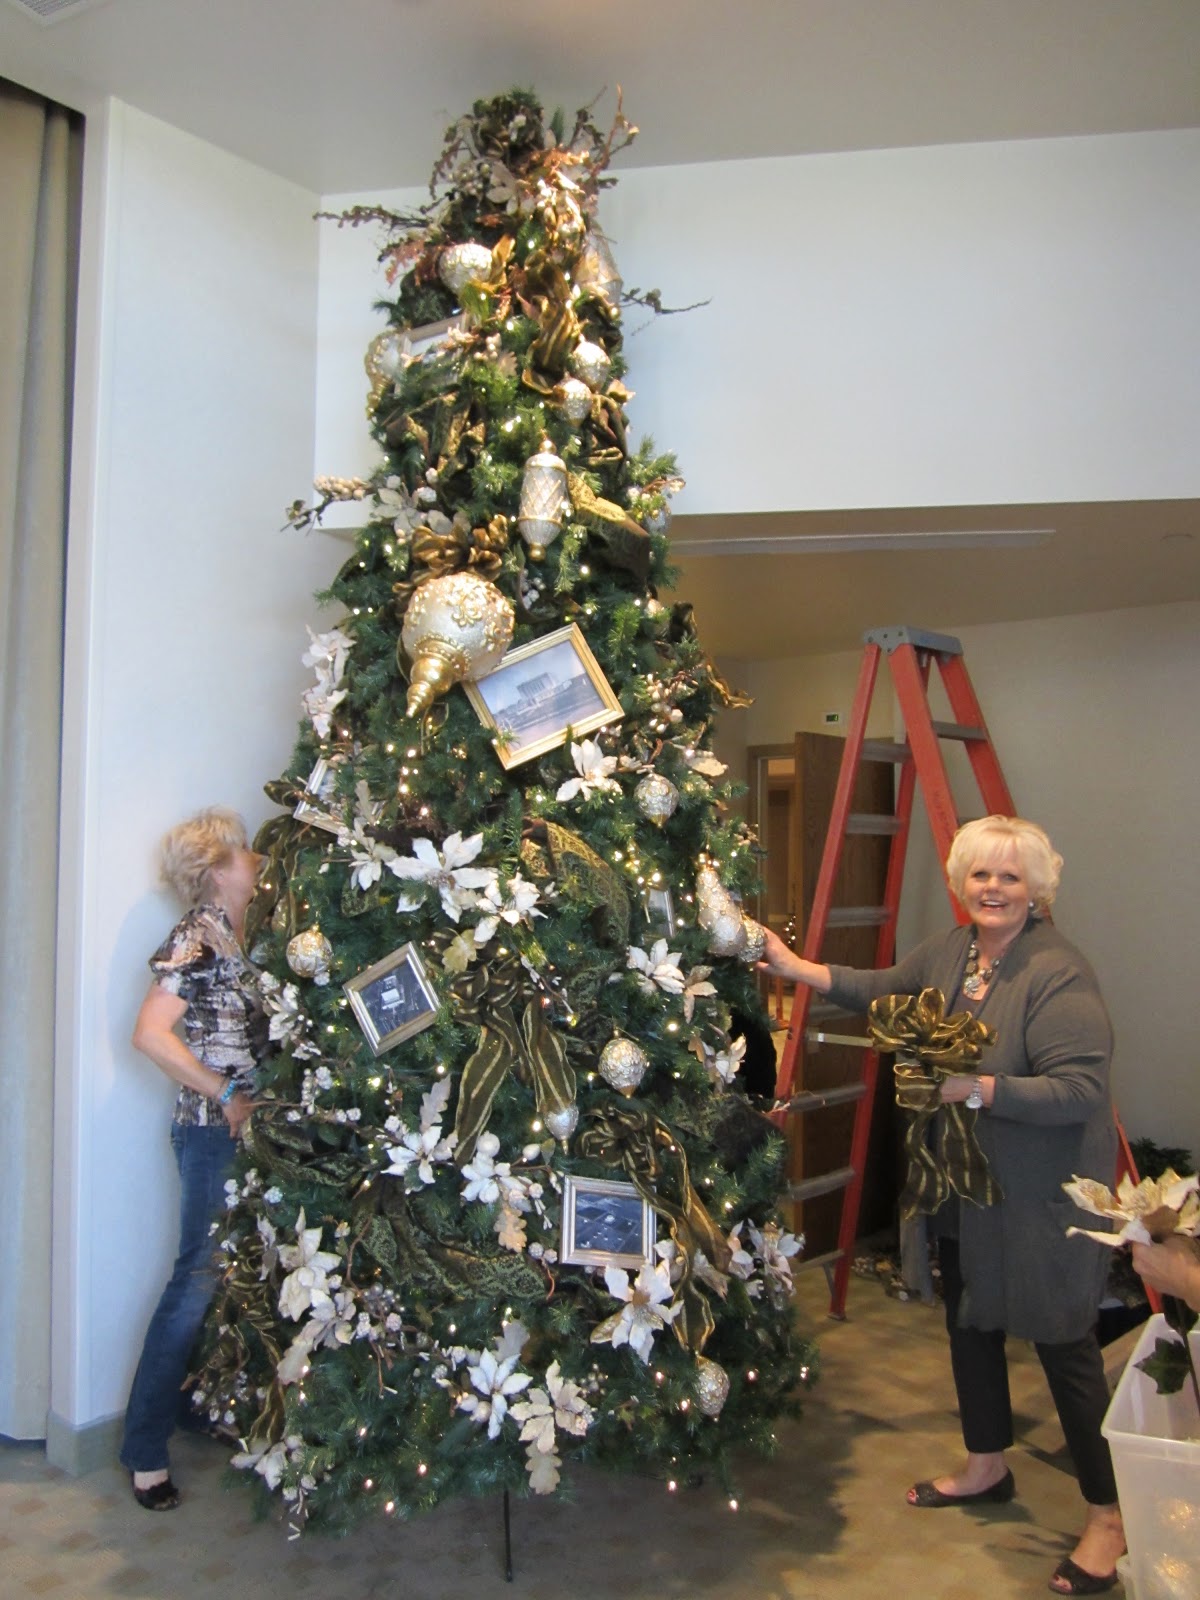 Wonderful volunteers decorated the gigantic Christmas Tree in the foyer at the front of the Visitors Center The small pictures are of different scenes